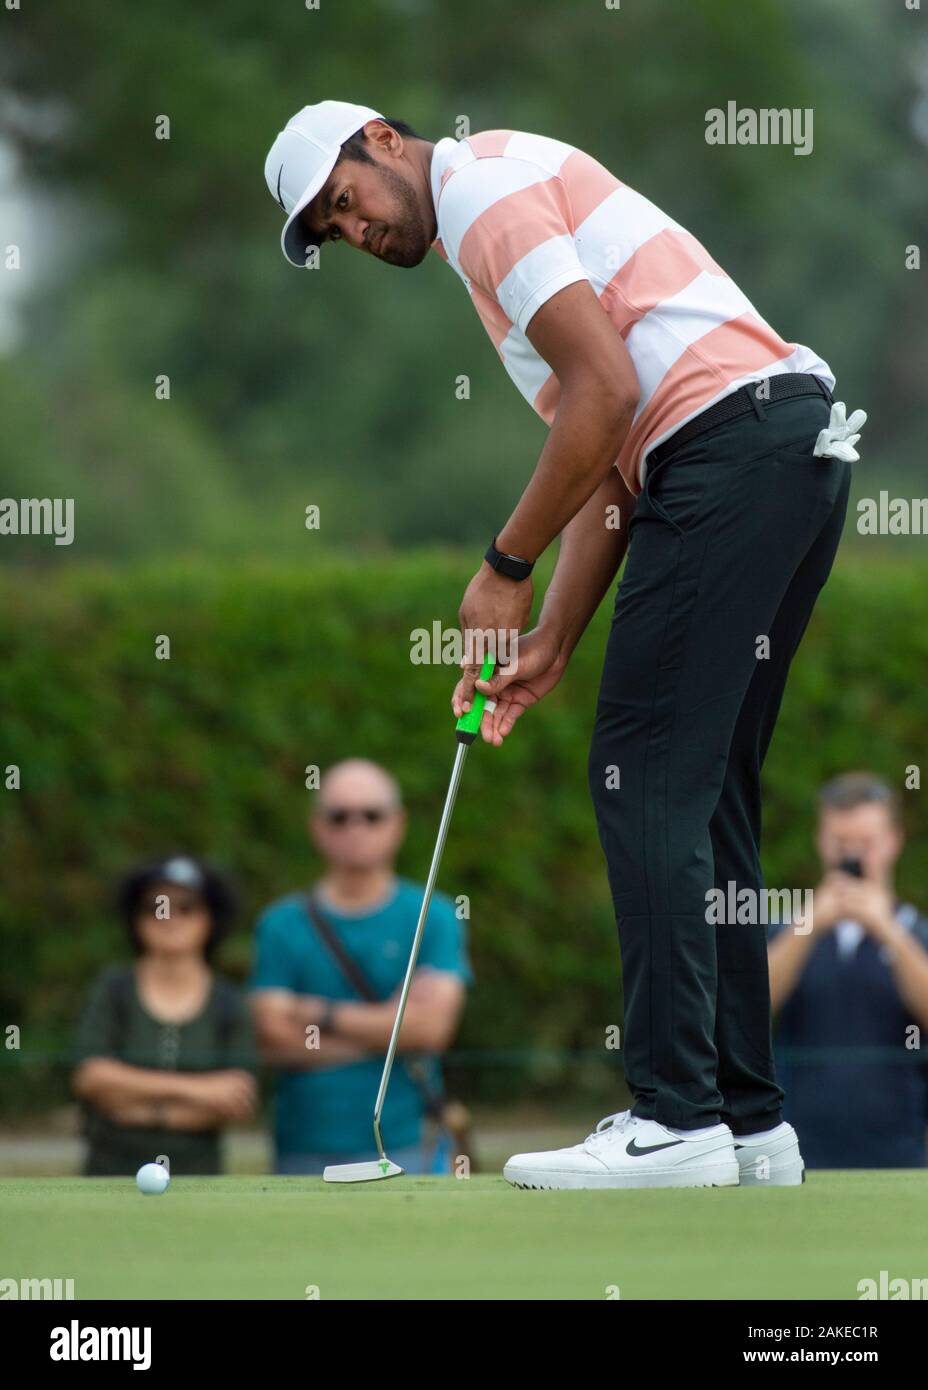 FANLING,HONG KONG SAR,CHINA: JANUARY 9th 2020. Hong Kong Open Golf Round.  Tony Finau from the USA on the 6th green during the opening round of the Hong  Kong Open.Alamy Live news/Jayne Russell